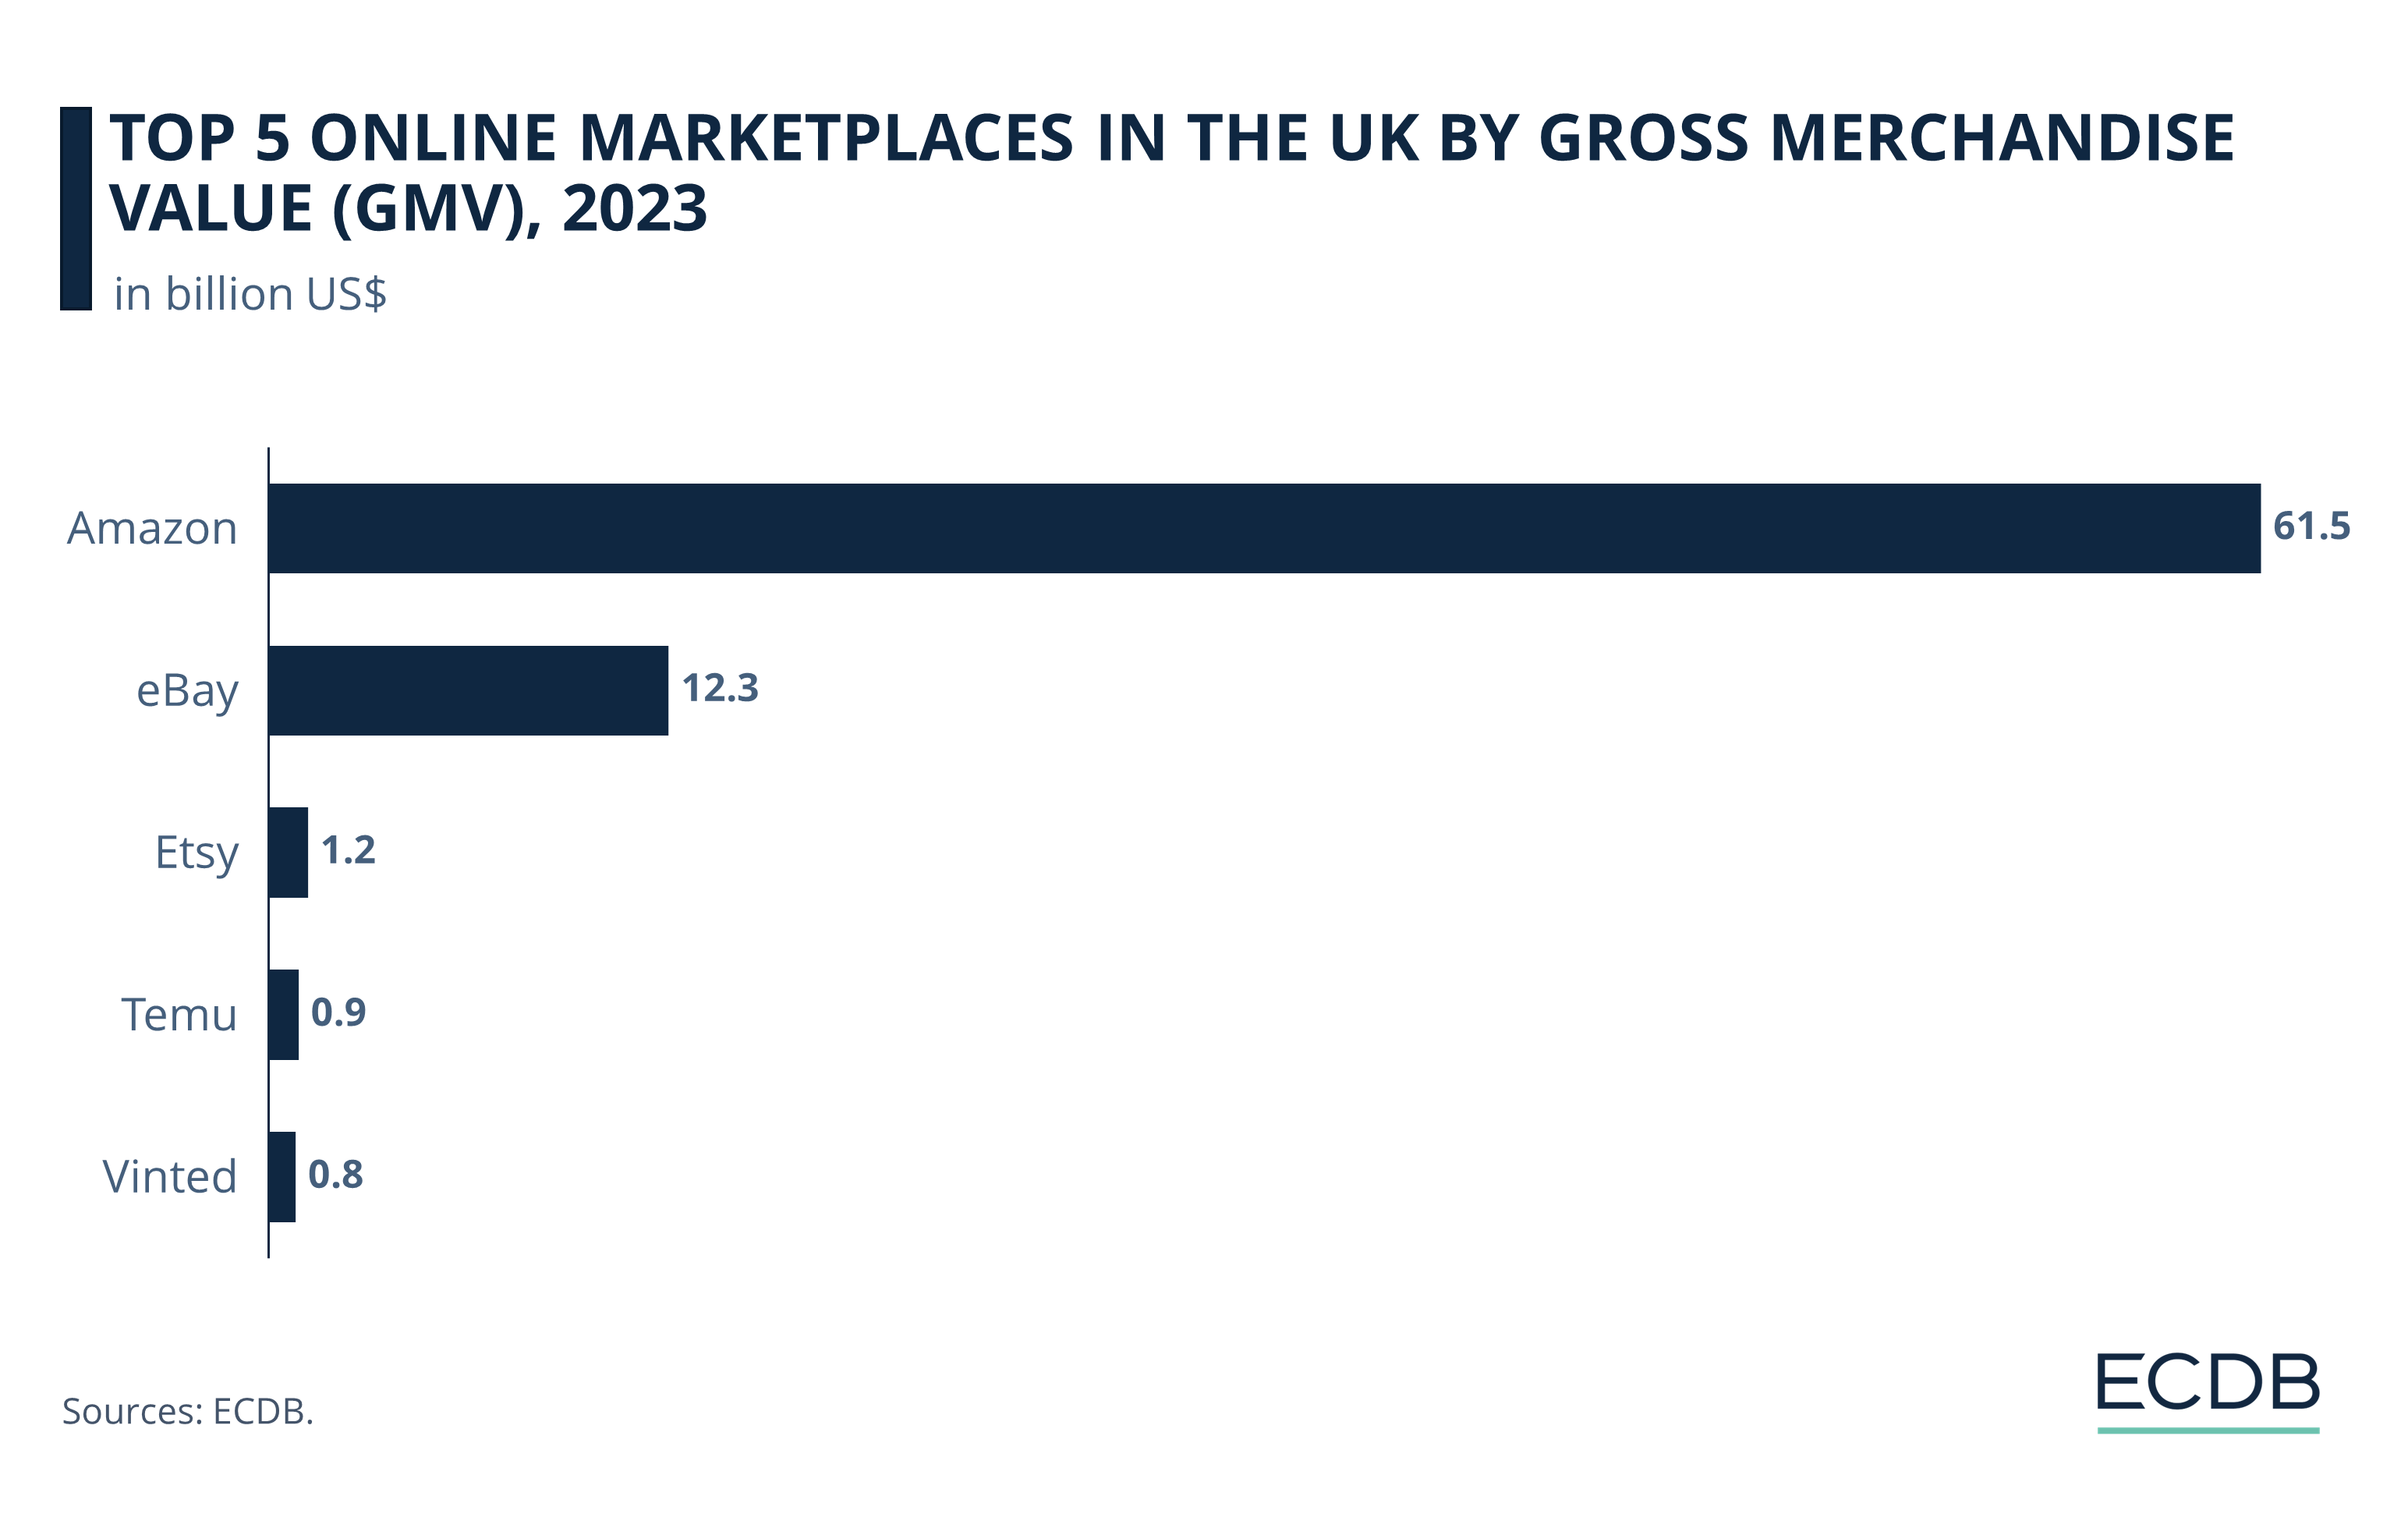 Top 5 Online Marketplaces in the UK by Gross Merchandise Value (GMV), 2022